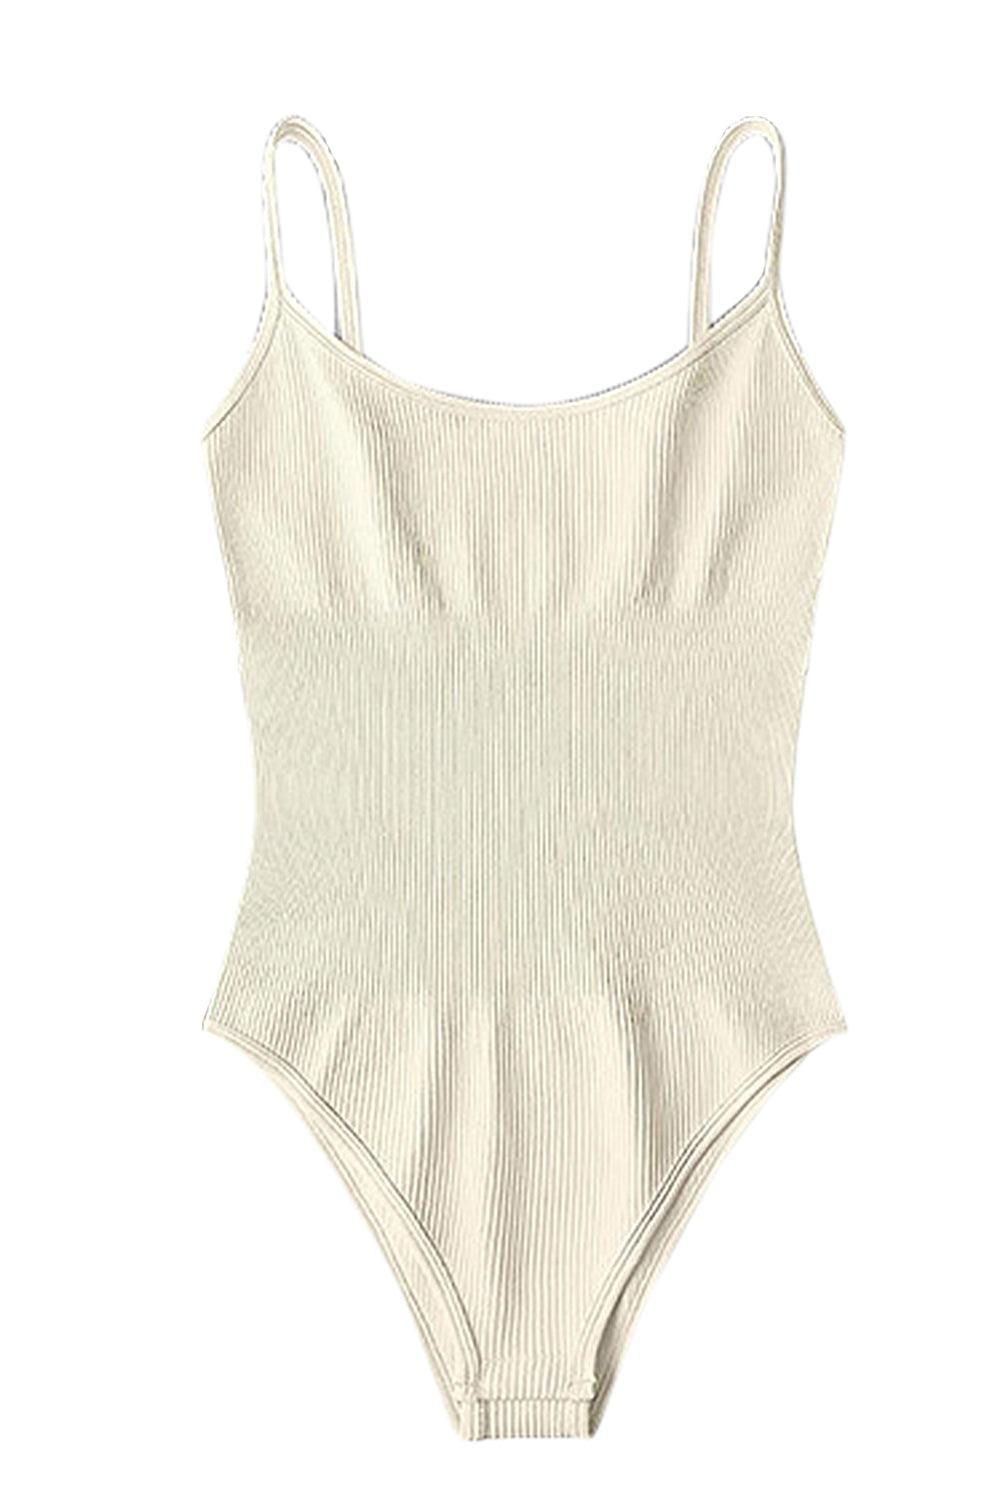 a women's white one piece swimsuit on a white background